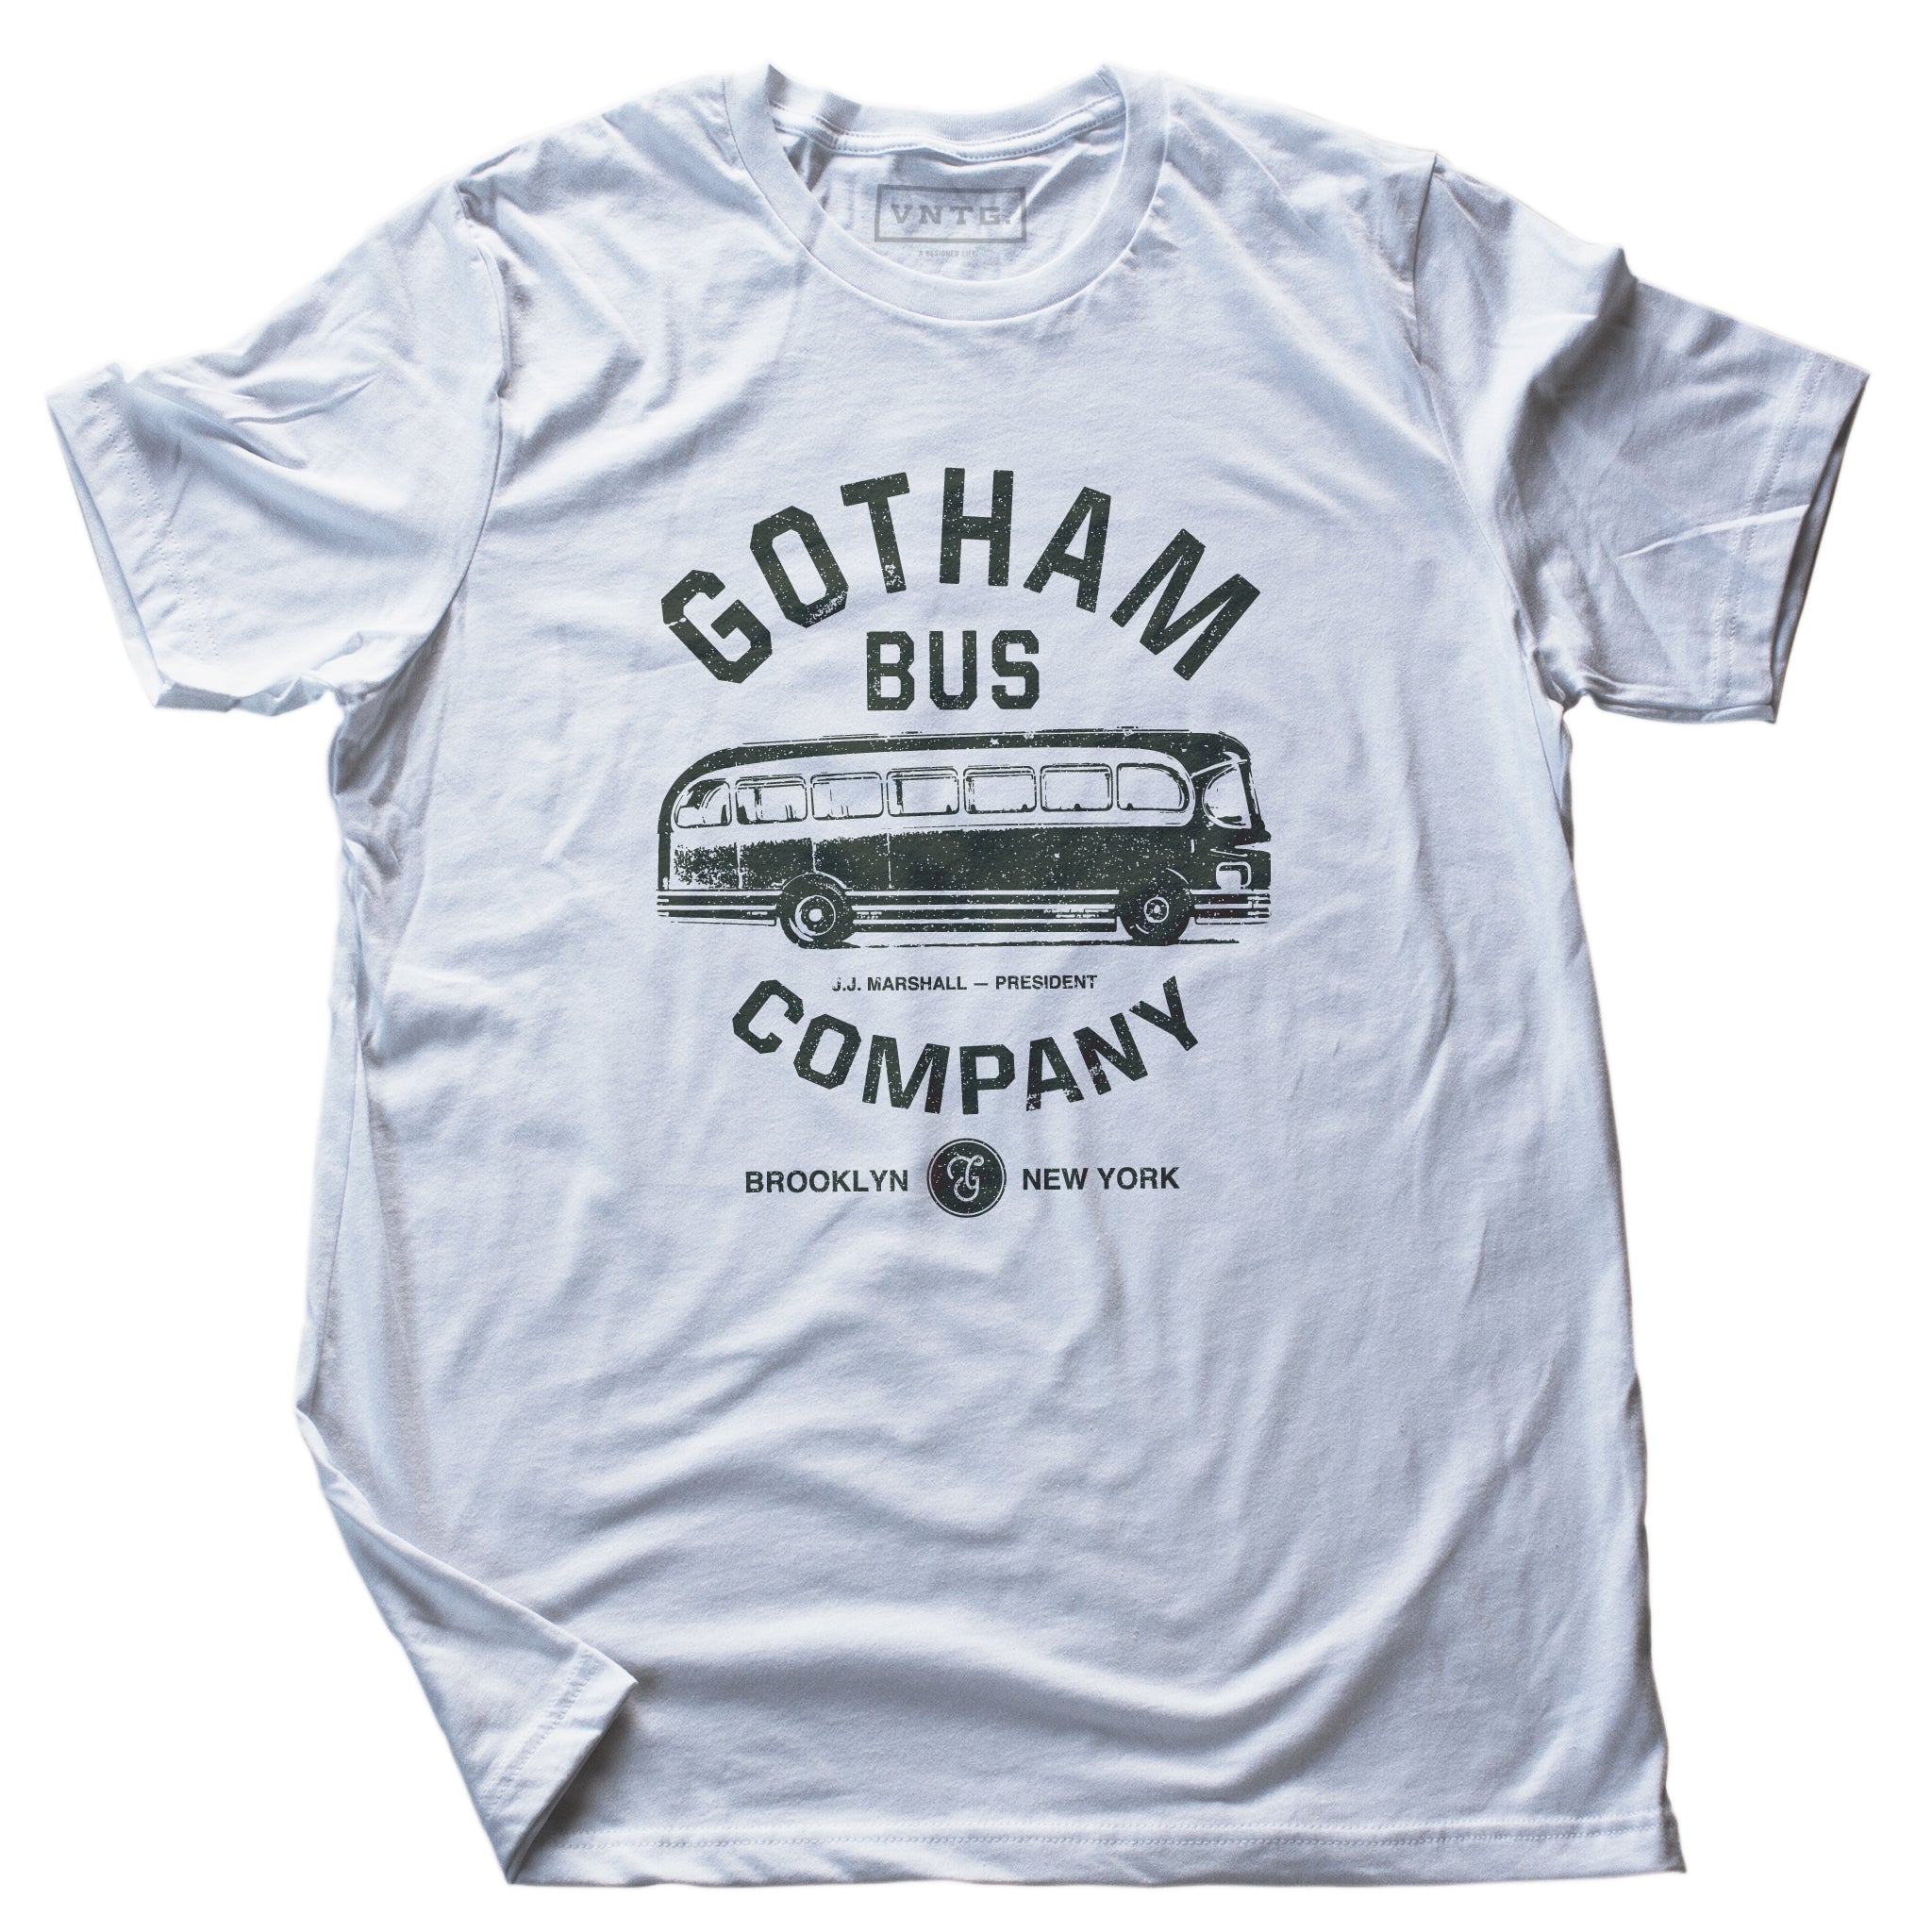 A retro t-shirt in white, inspired by The Honeymooners, a 1950s Classic tv show featuring Jackie Gleason as Ralph Kramden. This shirt is a fictional promotion of the show’s Gotham Bus Company and shows a graphic of an old bus. By fashion brand VNTG, available from wolfsaint.net